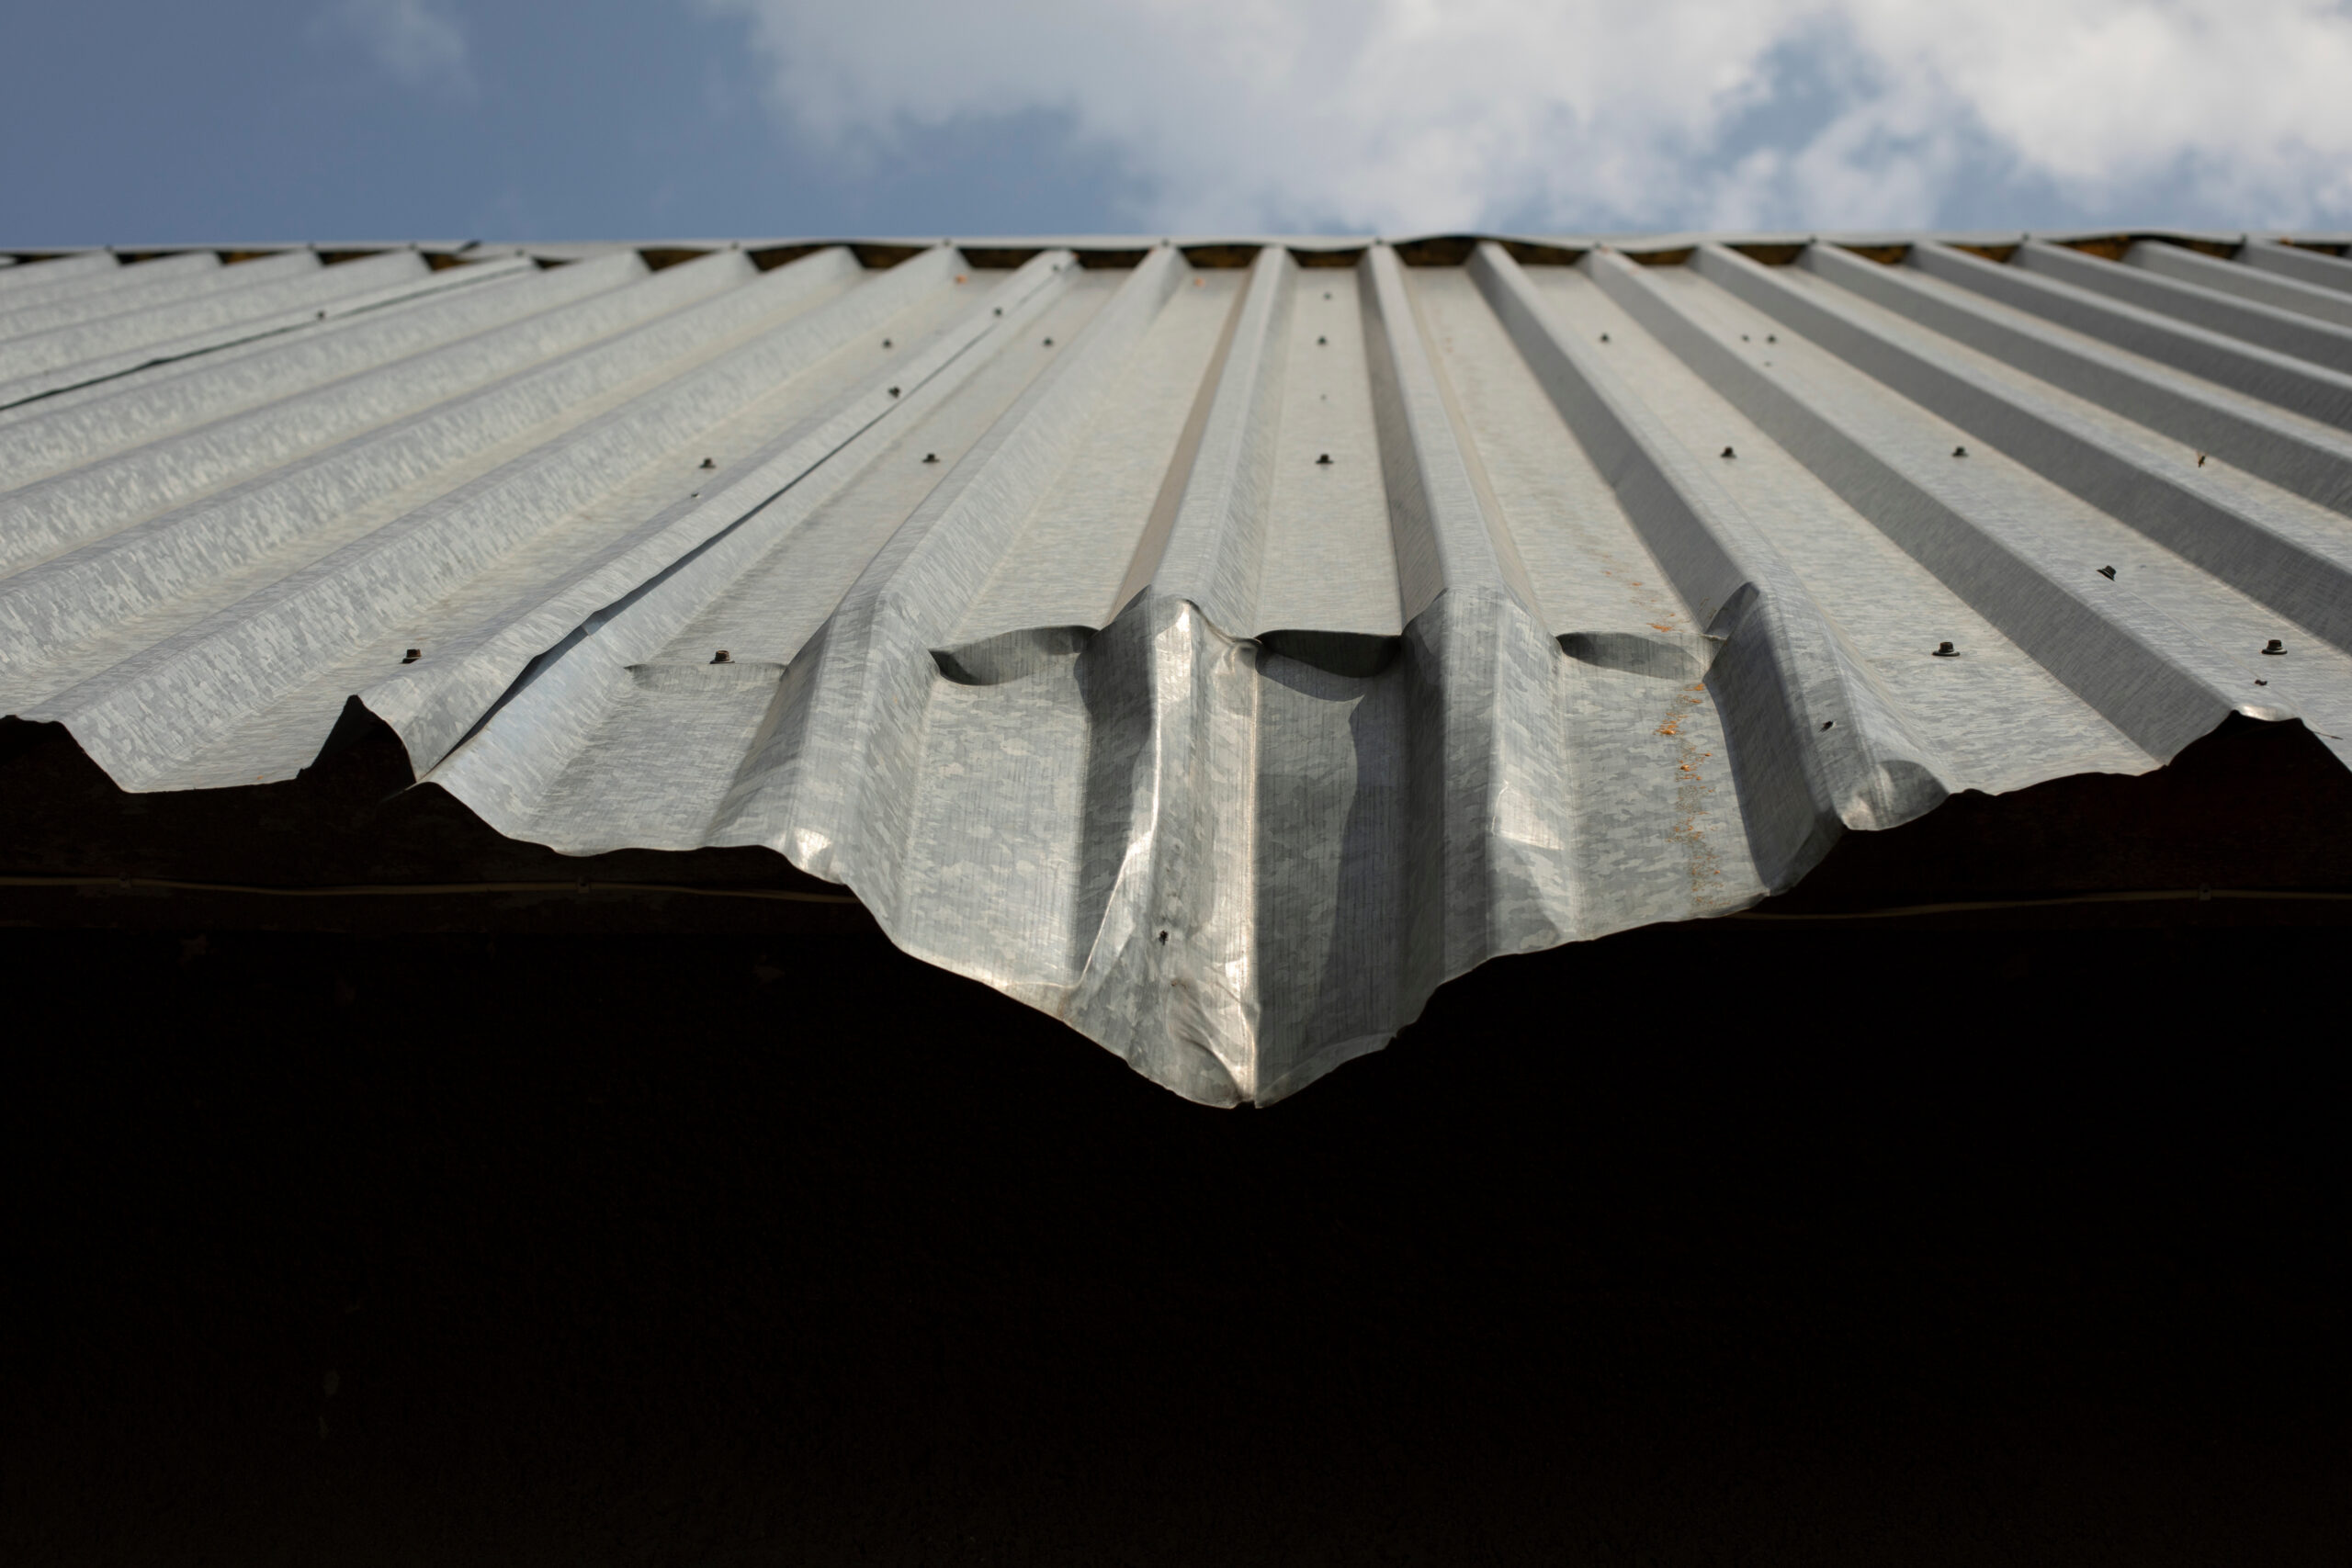 A sloped metal roof is dented at the bottom, indicating damage